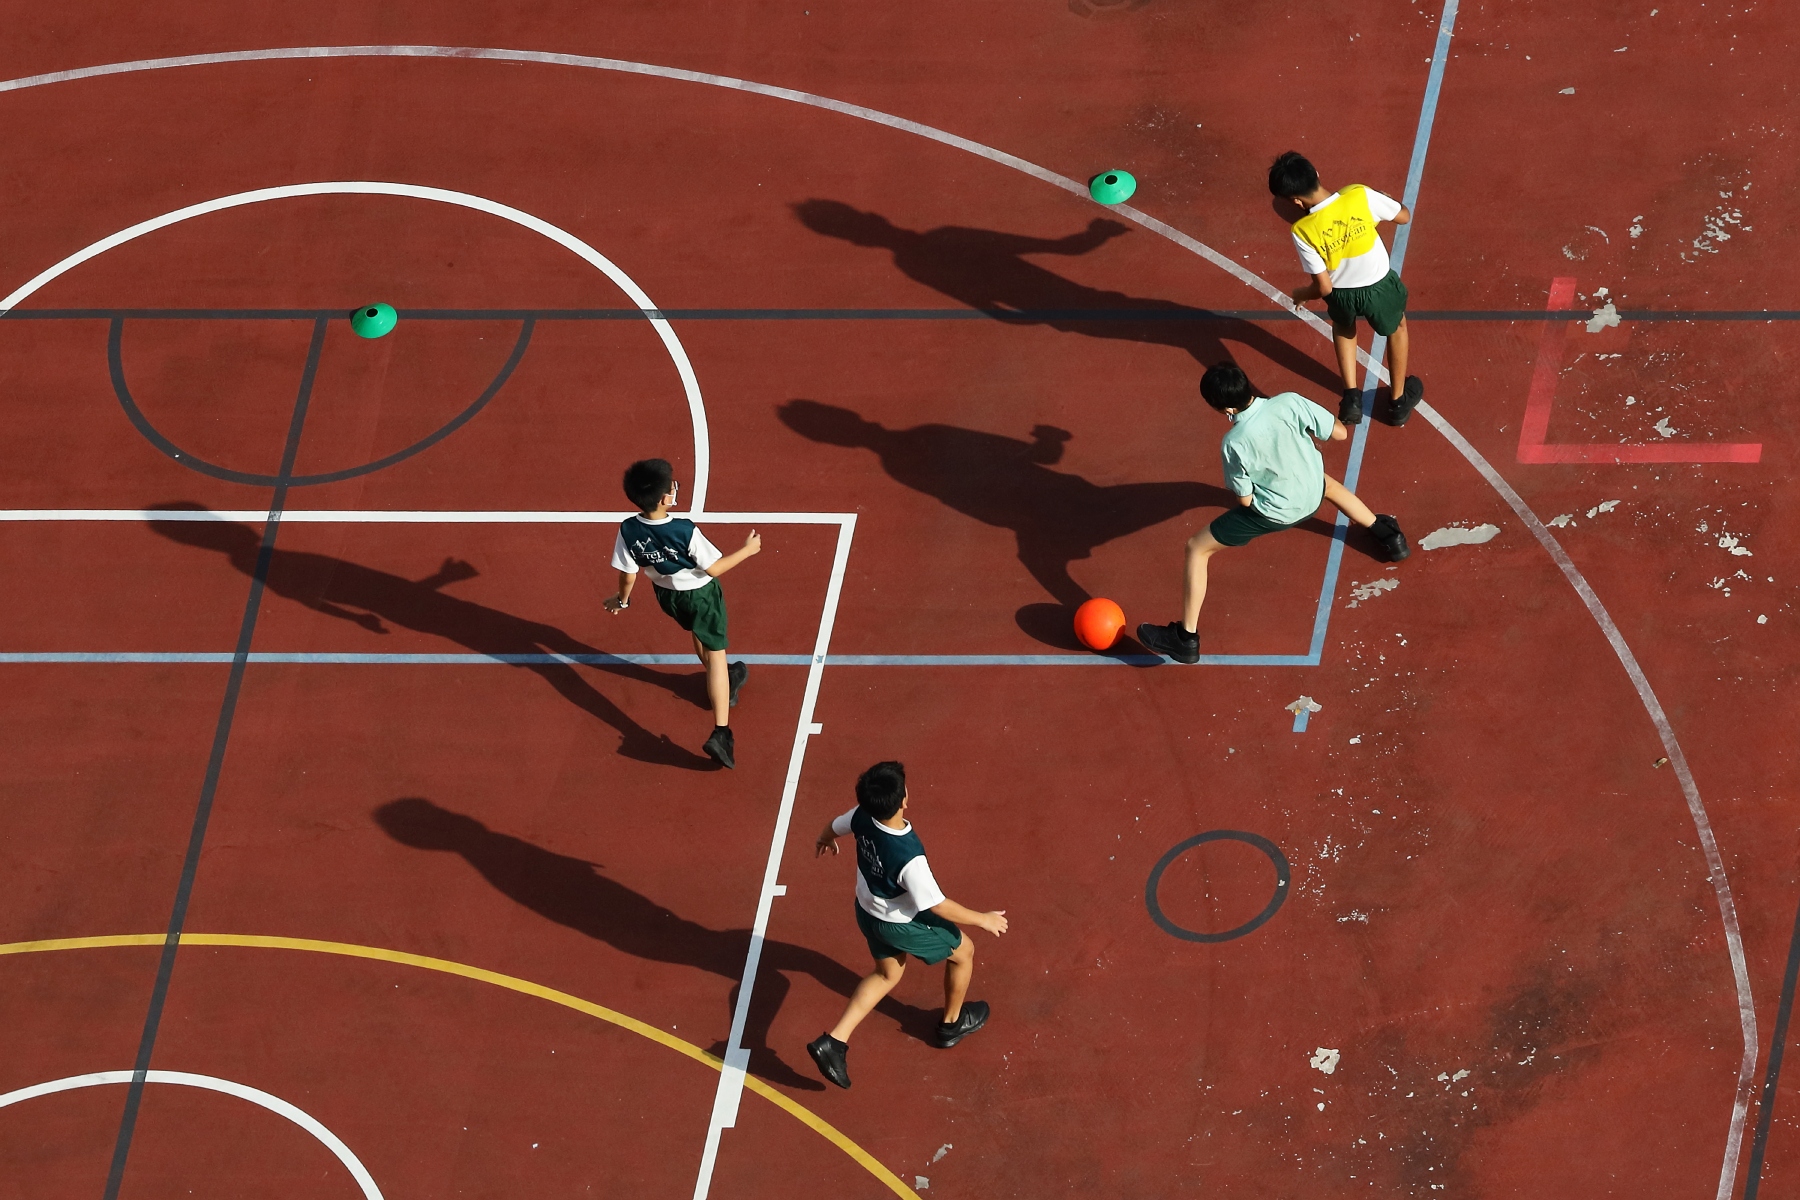 Secondary school students play football on a sports court